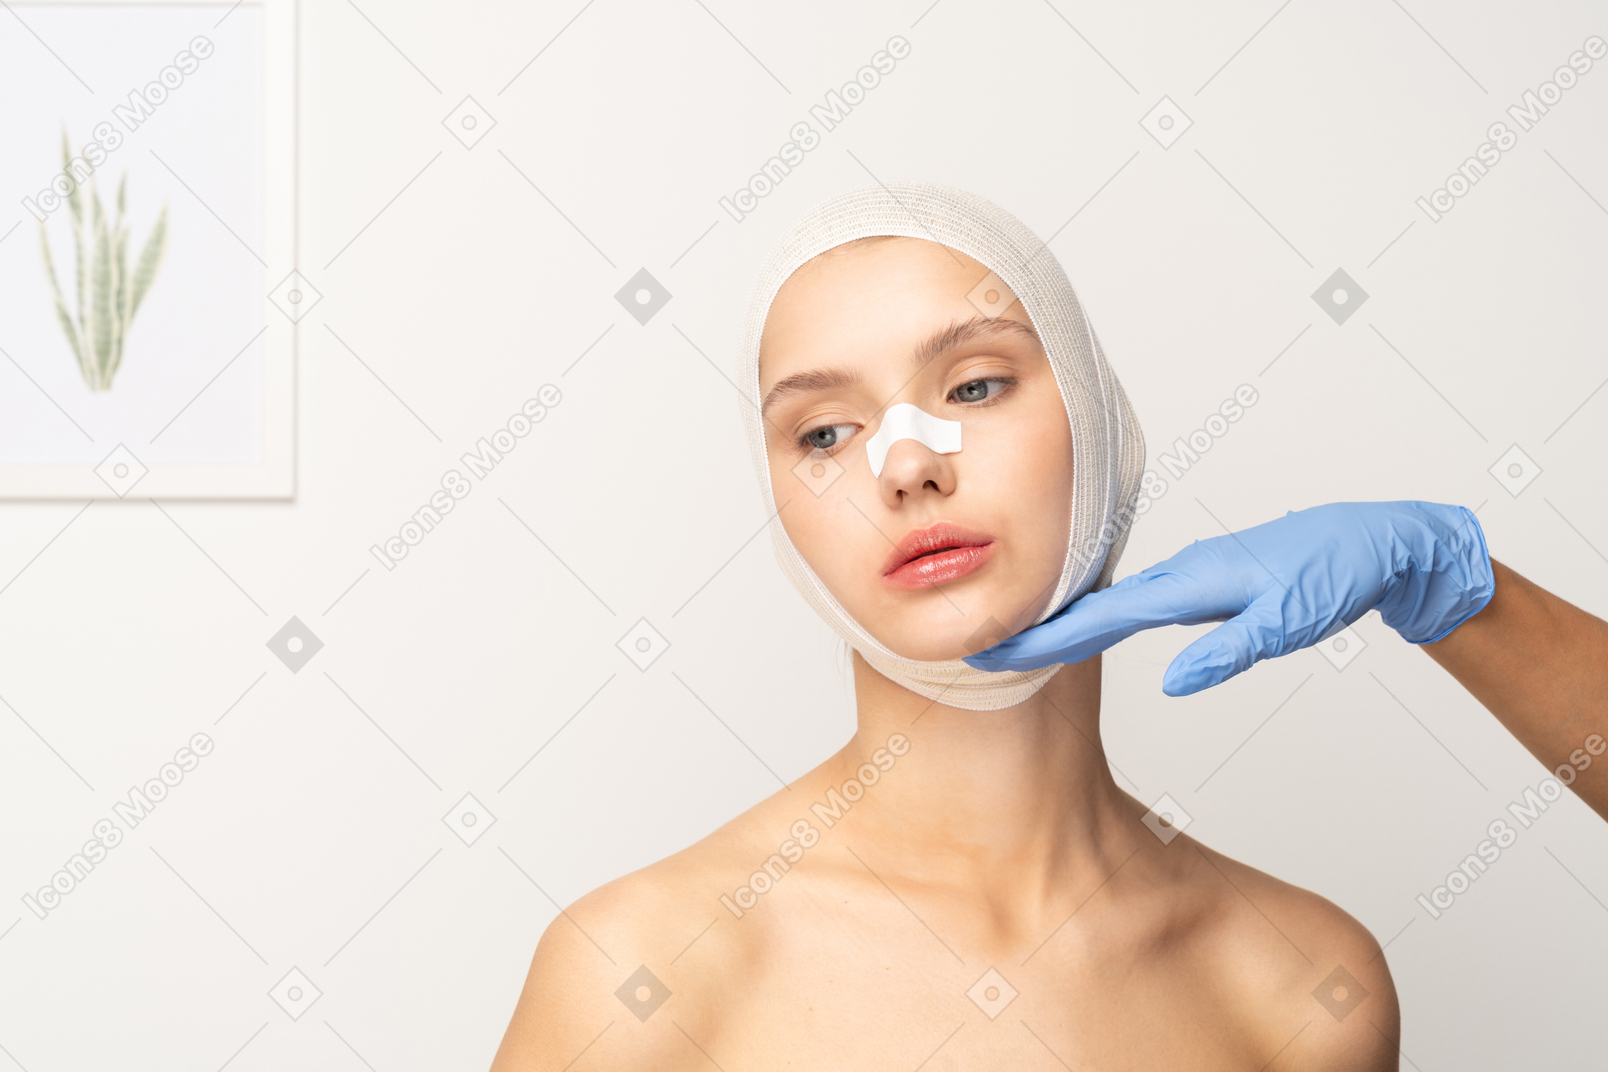 Female patient with gloved hand touching her chin